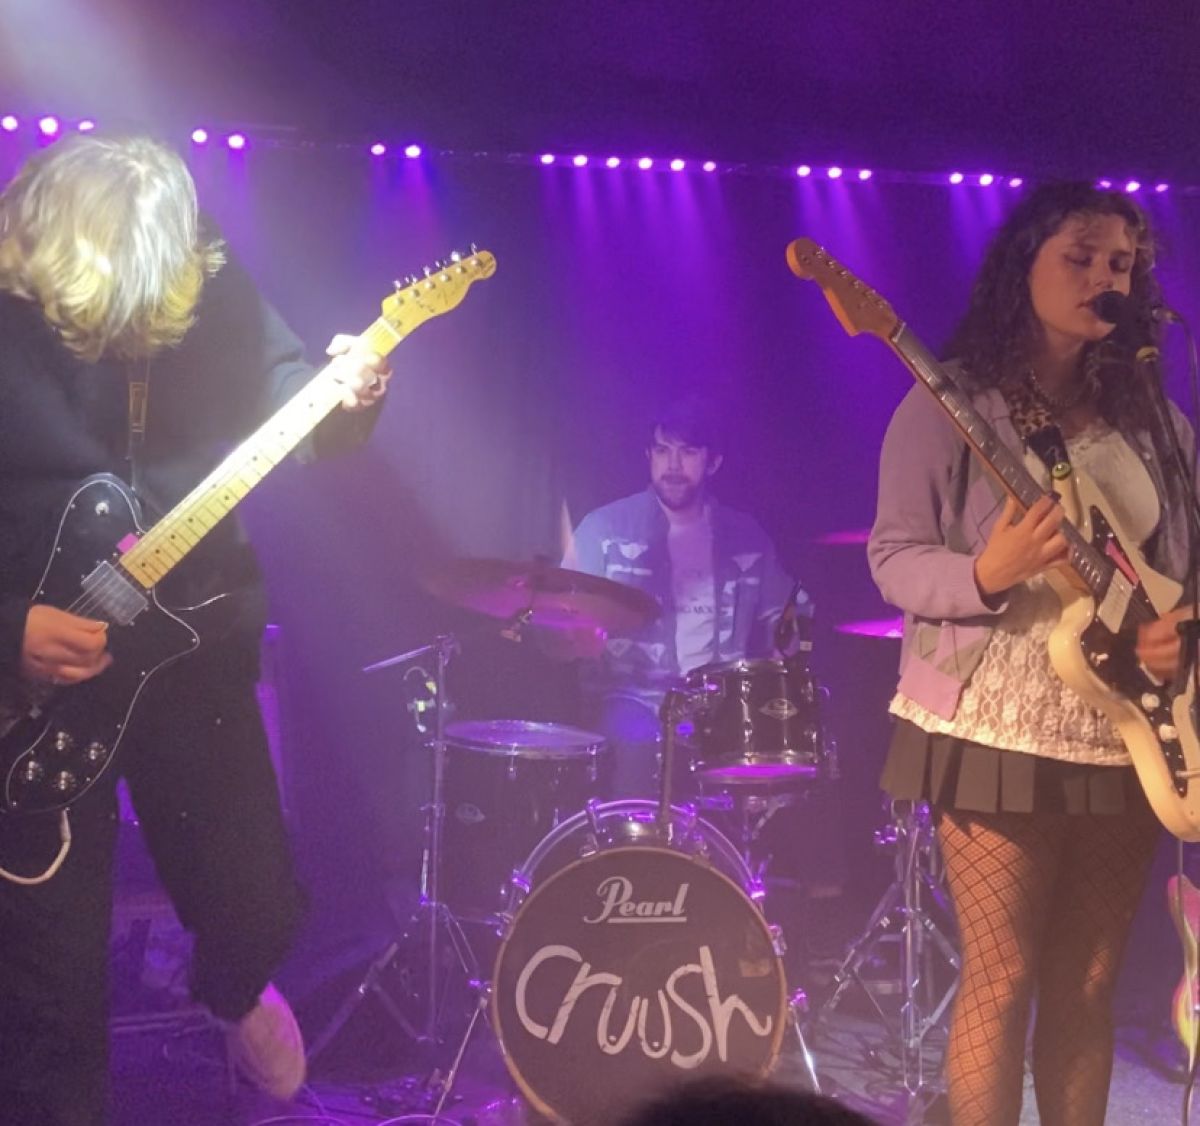 cruush live in Manchester: Melodic malaise